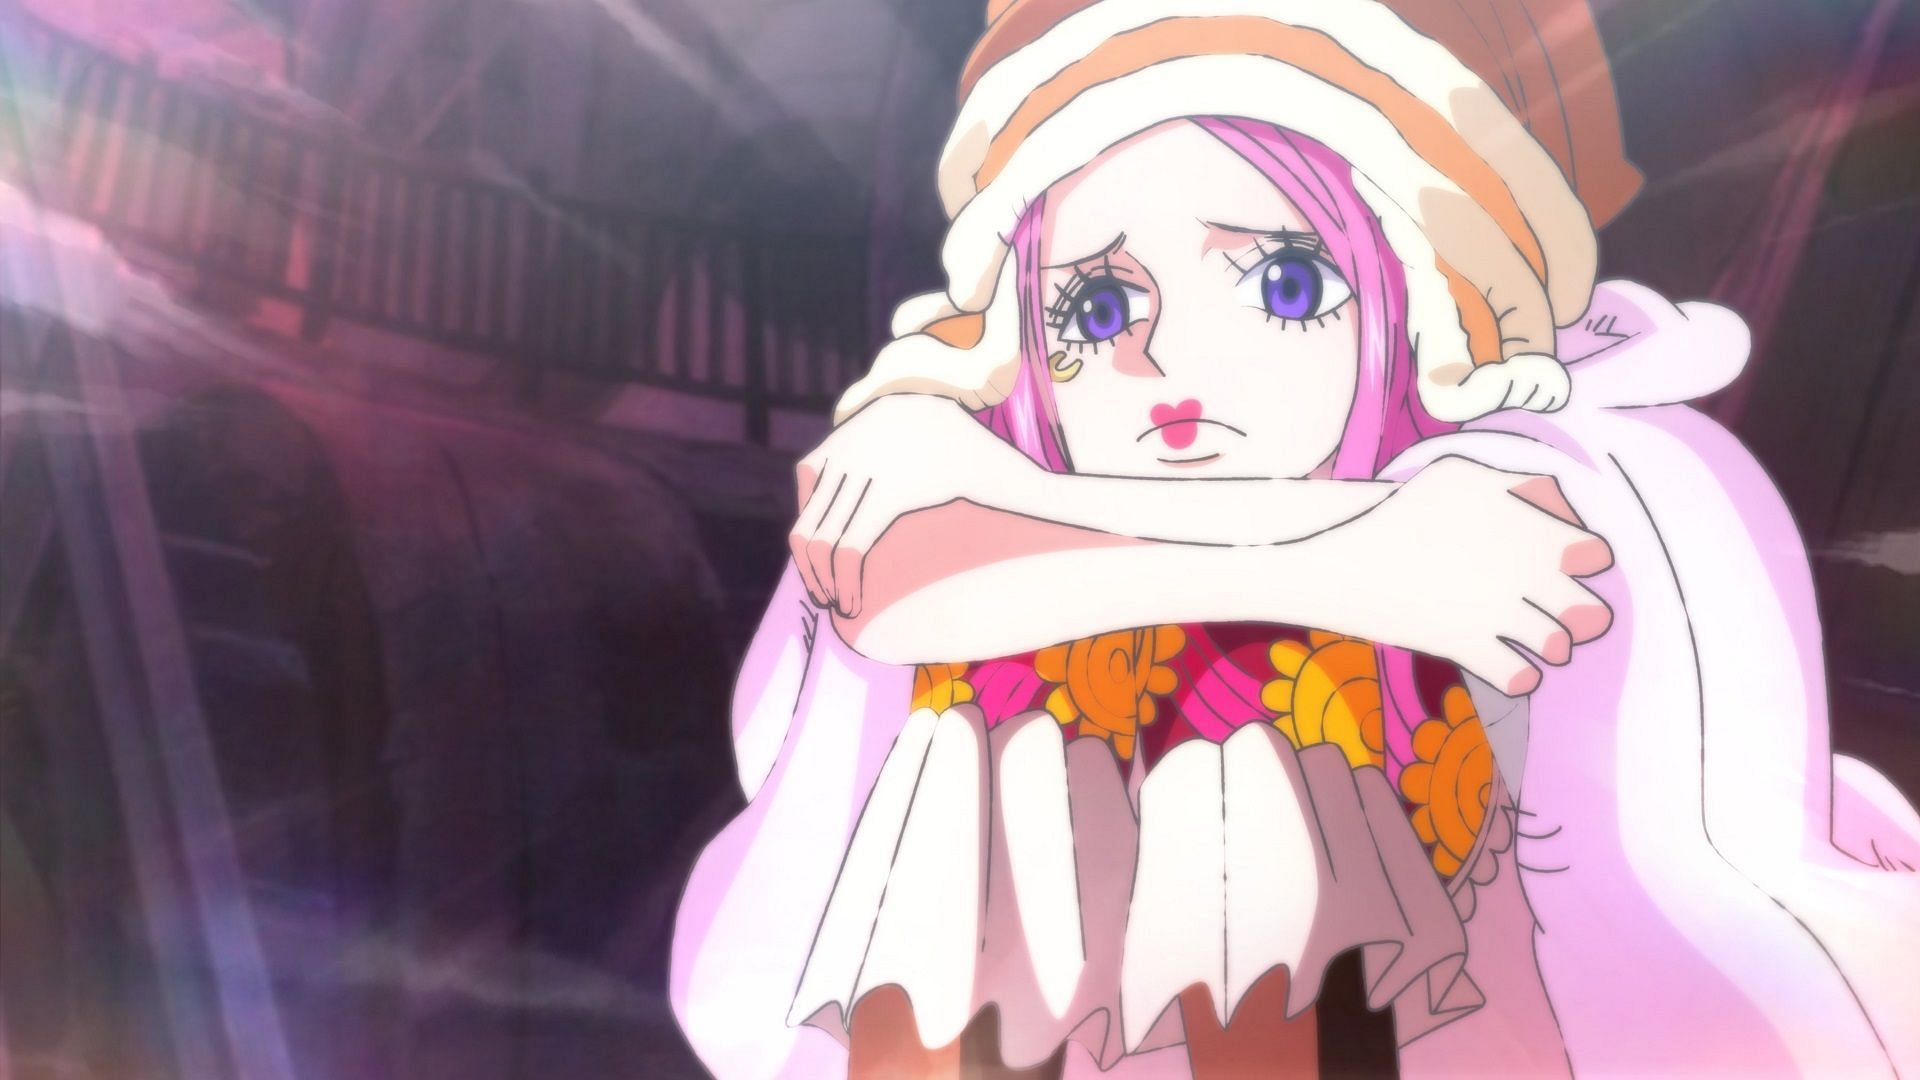 Bonney can turn herself into a child, but is that her true form? (Image via Eiichiro Oda/Shueisha, One Piece)